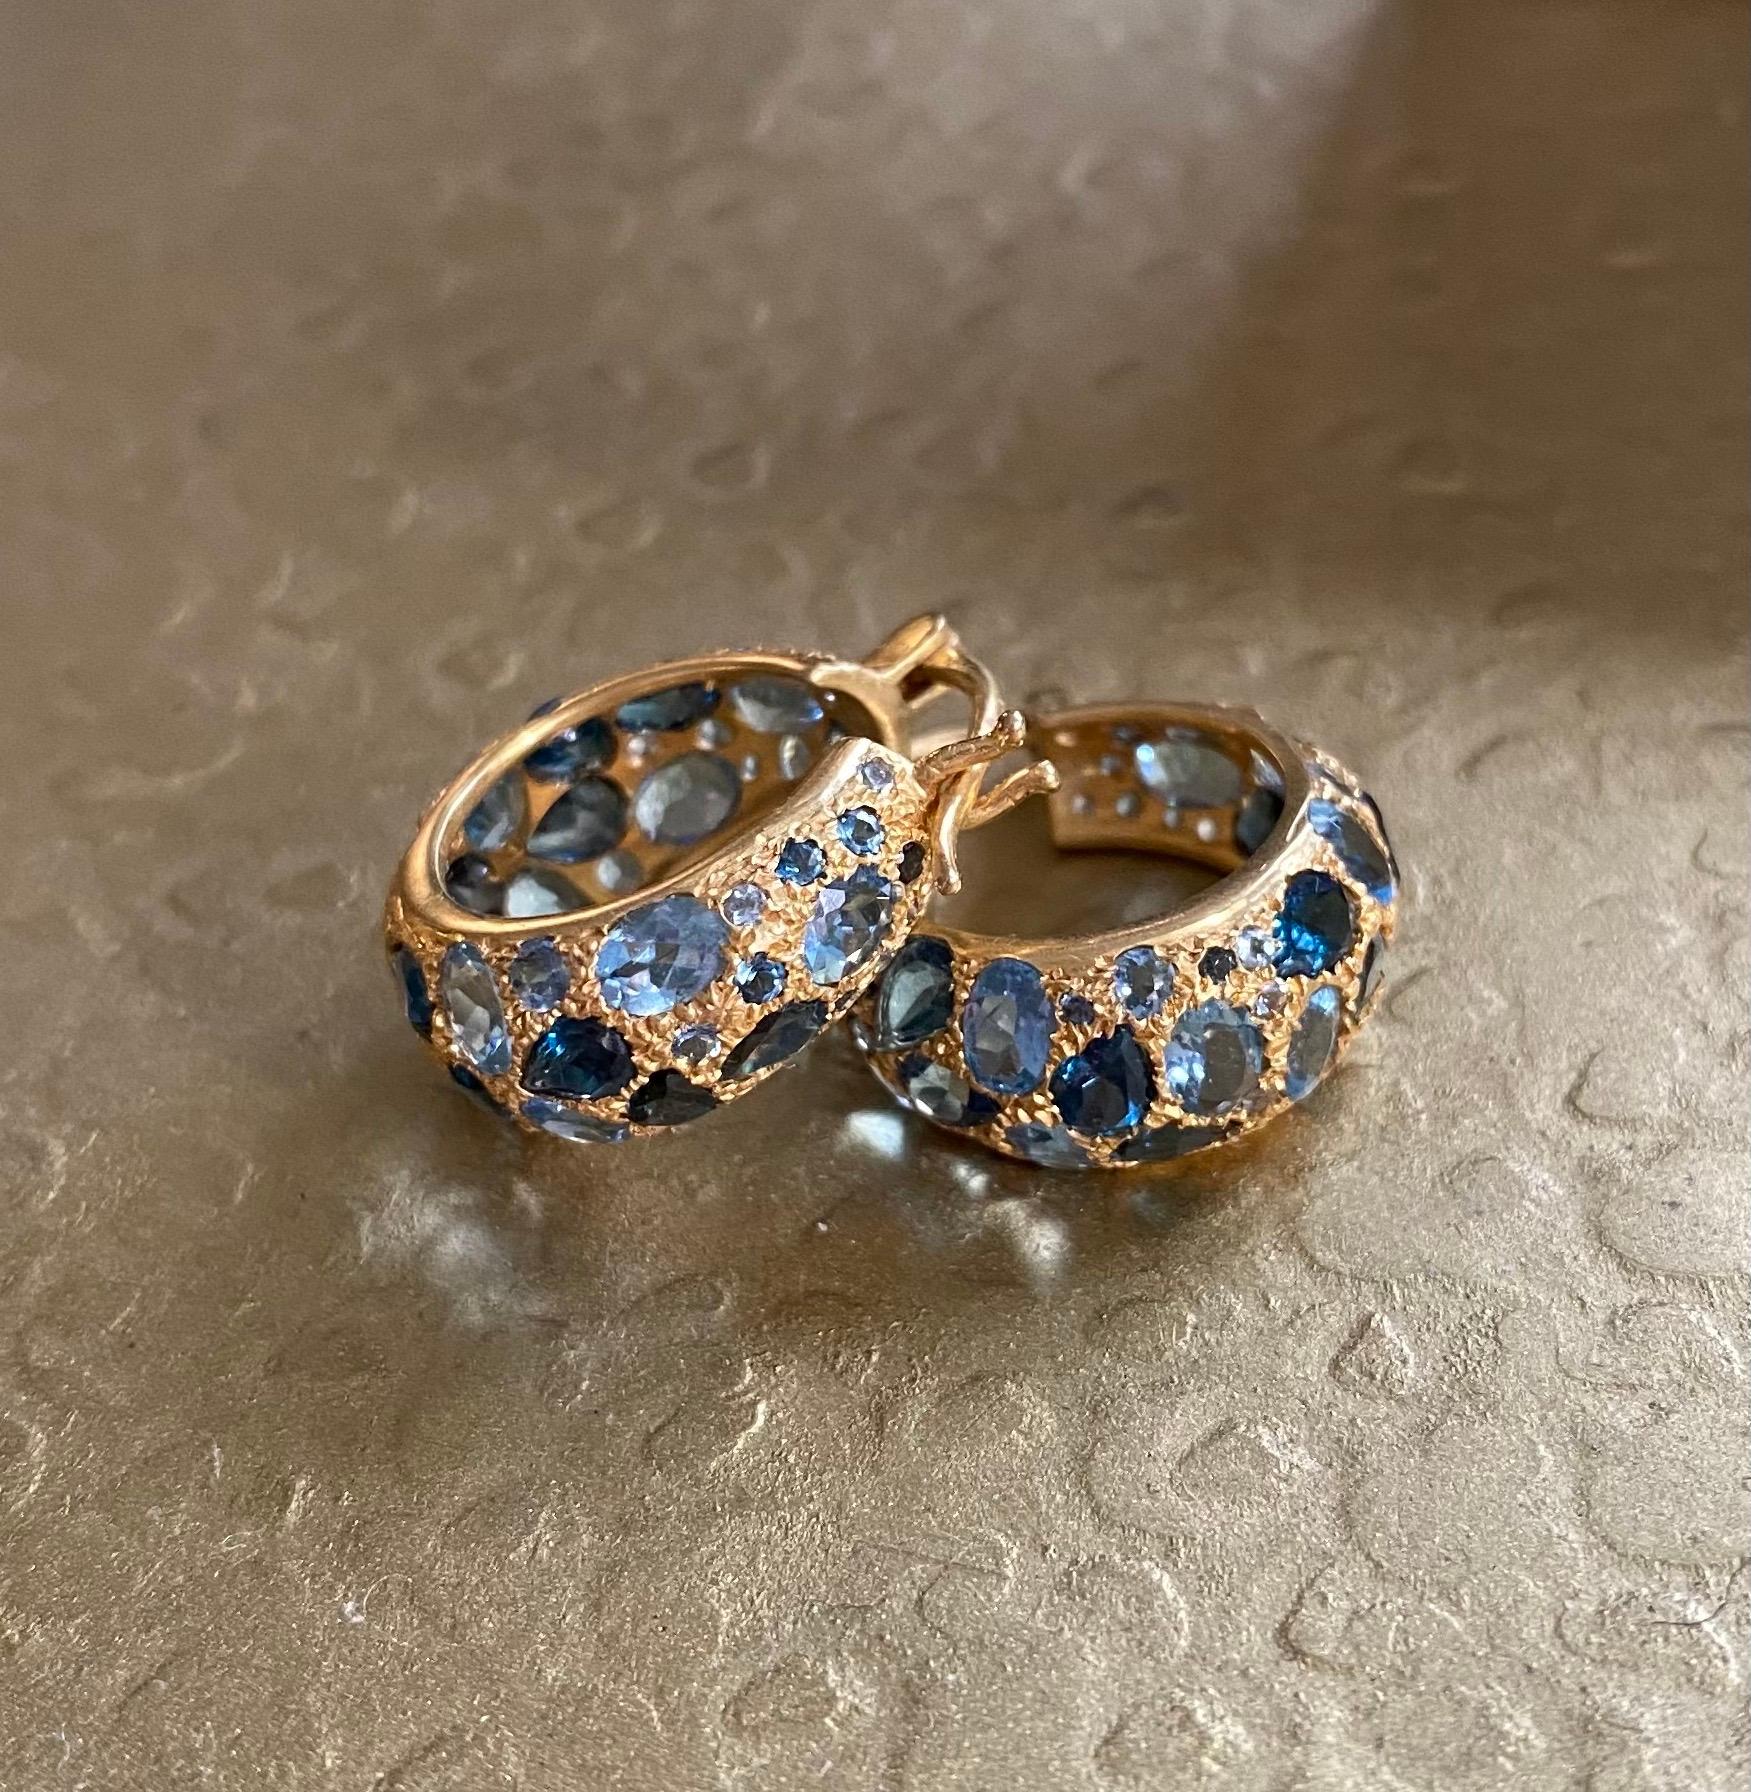 Designed by award winning jewelry designer, Lauren Harper, these Aquamarine and London blue Topaz hoops are set in a warm 18kt matte Gold and are sure to get noticed. Lightweight and secure, these hoops will be your go-to every day earring, even